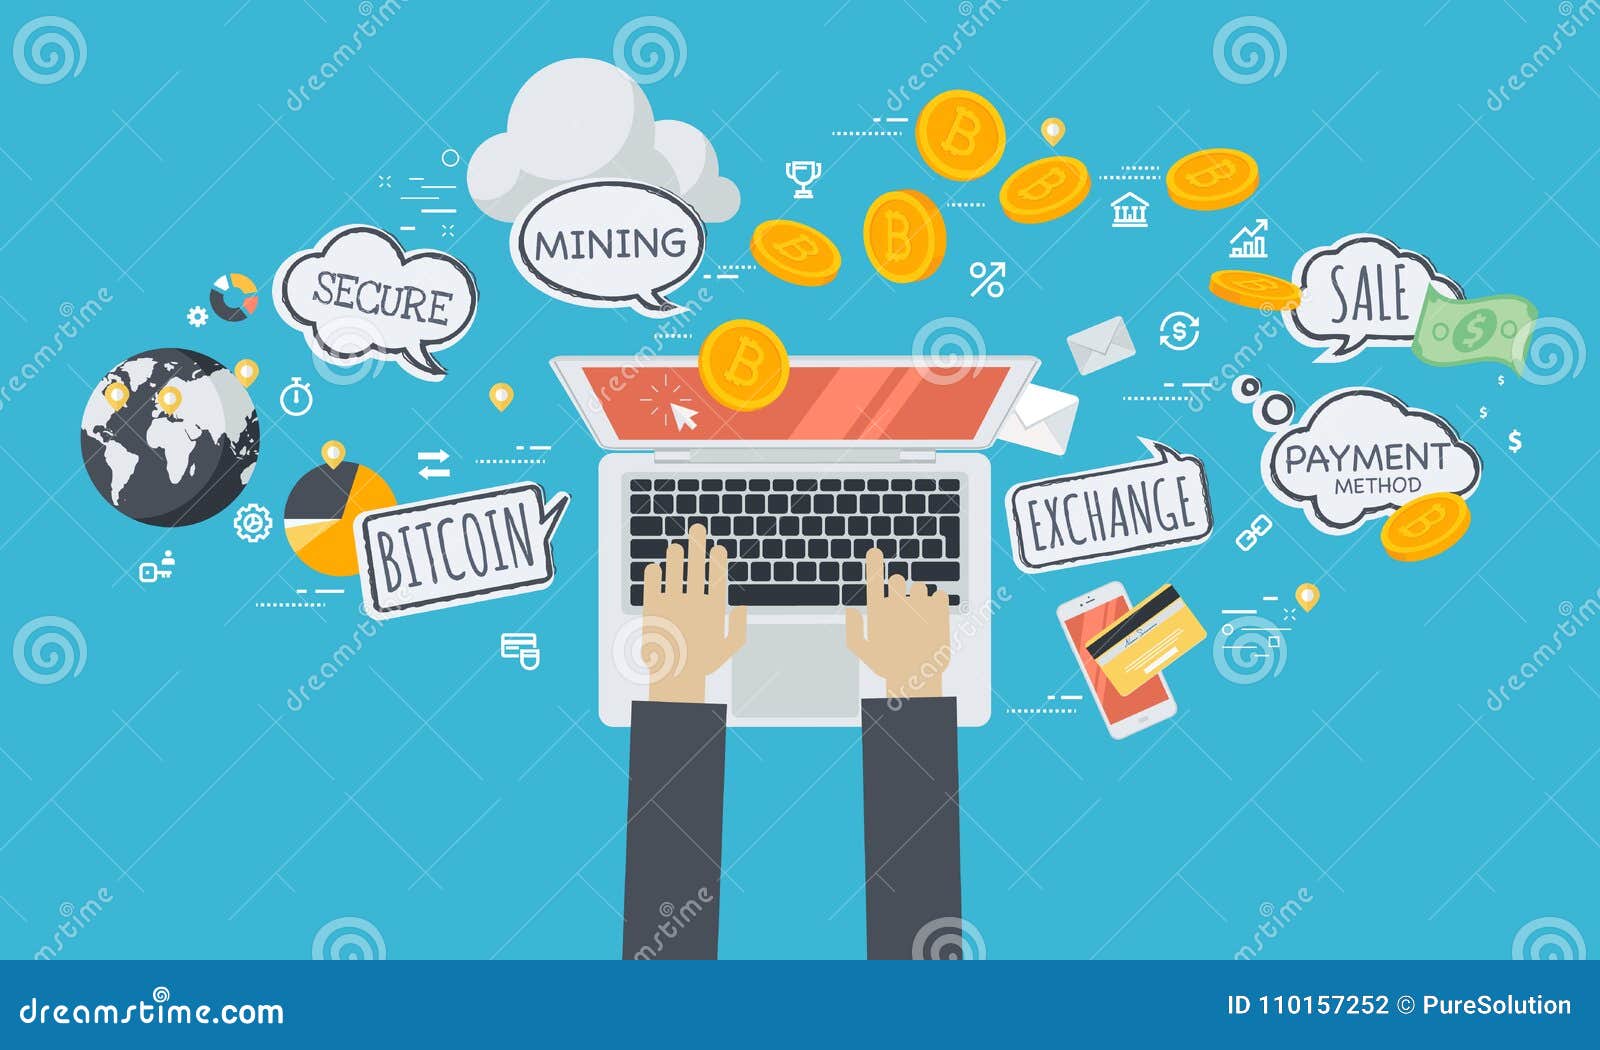 Cryptocurrency Trading Platform Stock Vector ...